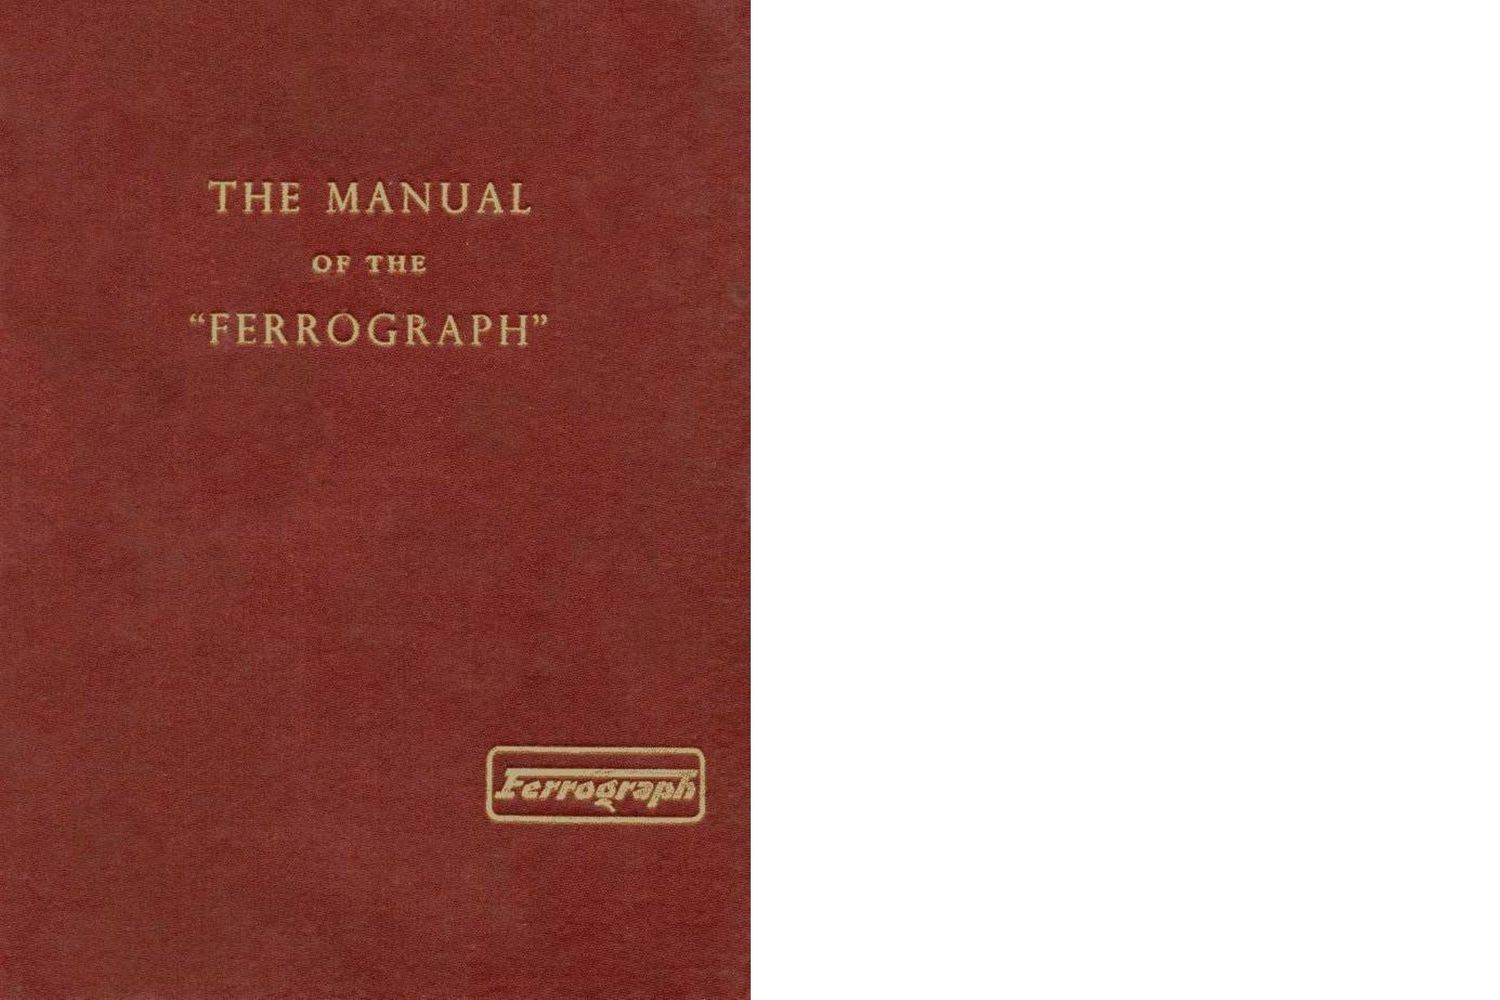 Ferrograph 2 A NL Owners Manual